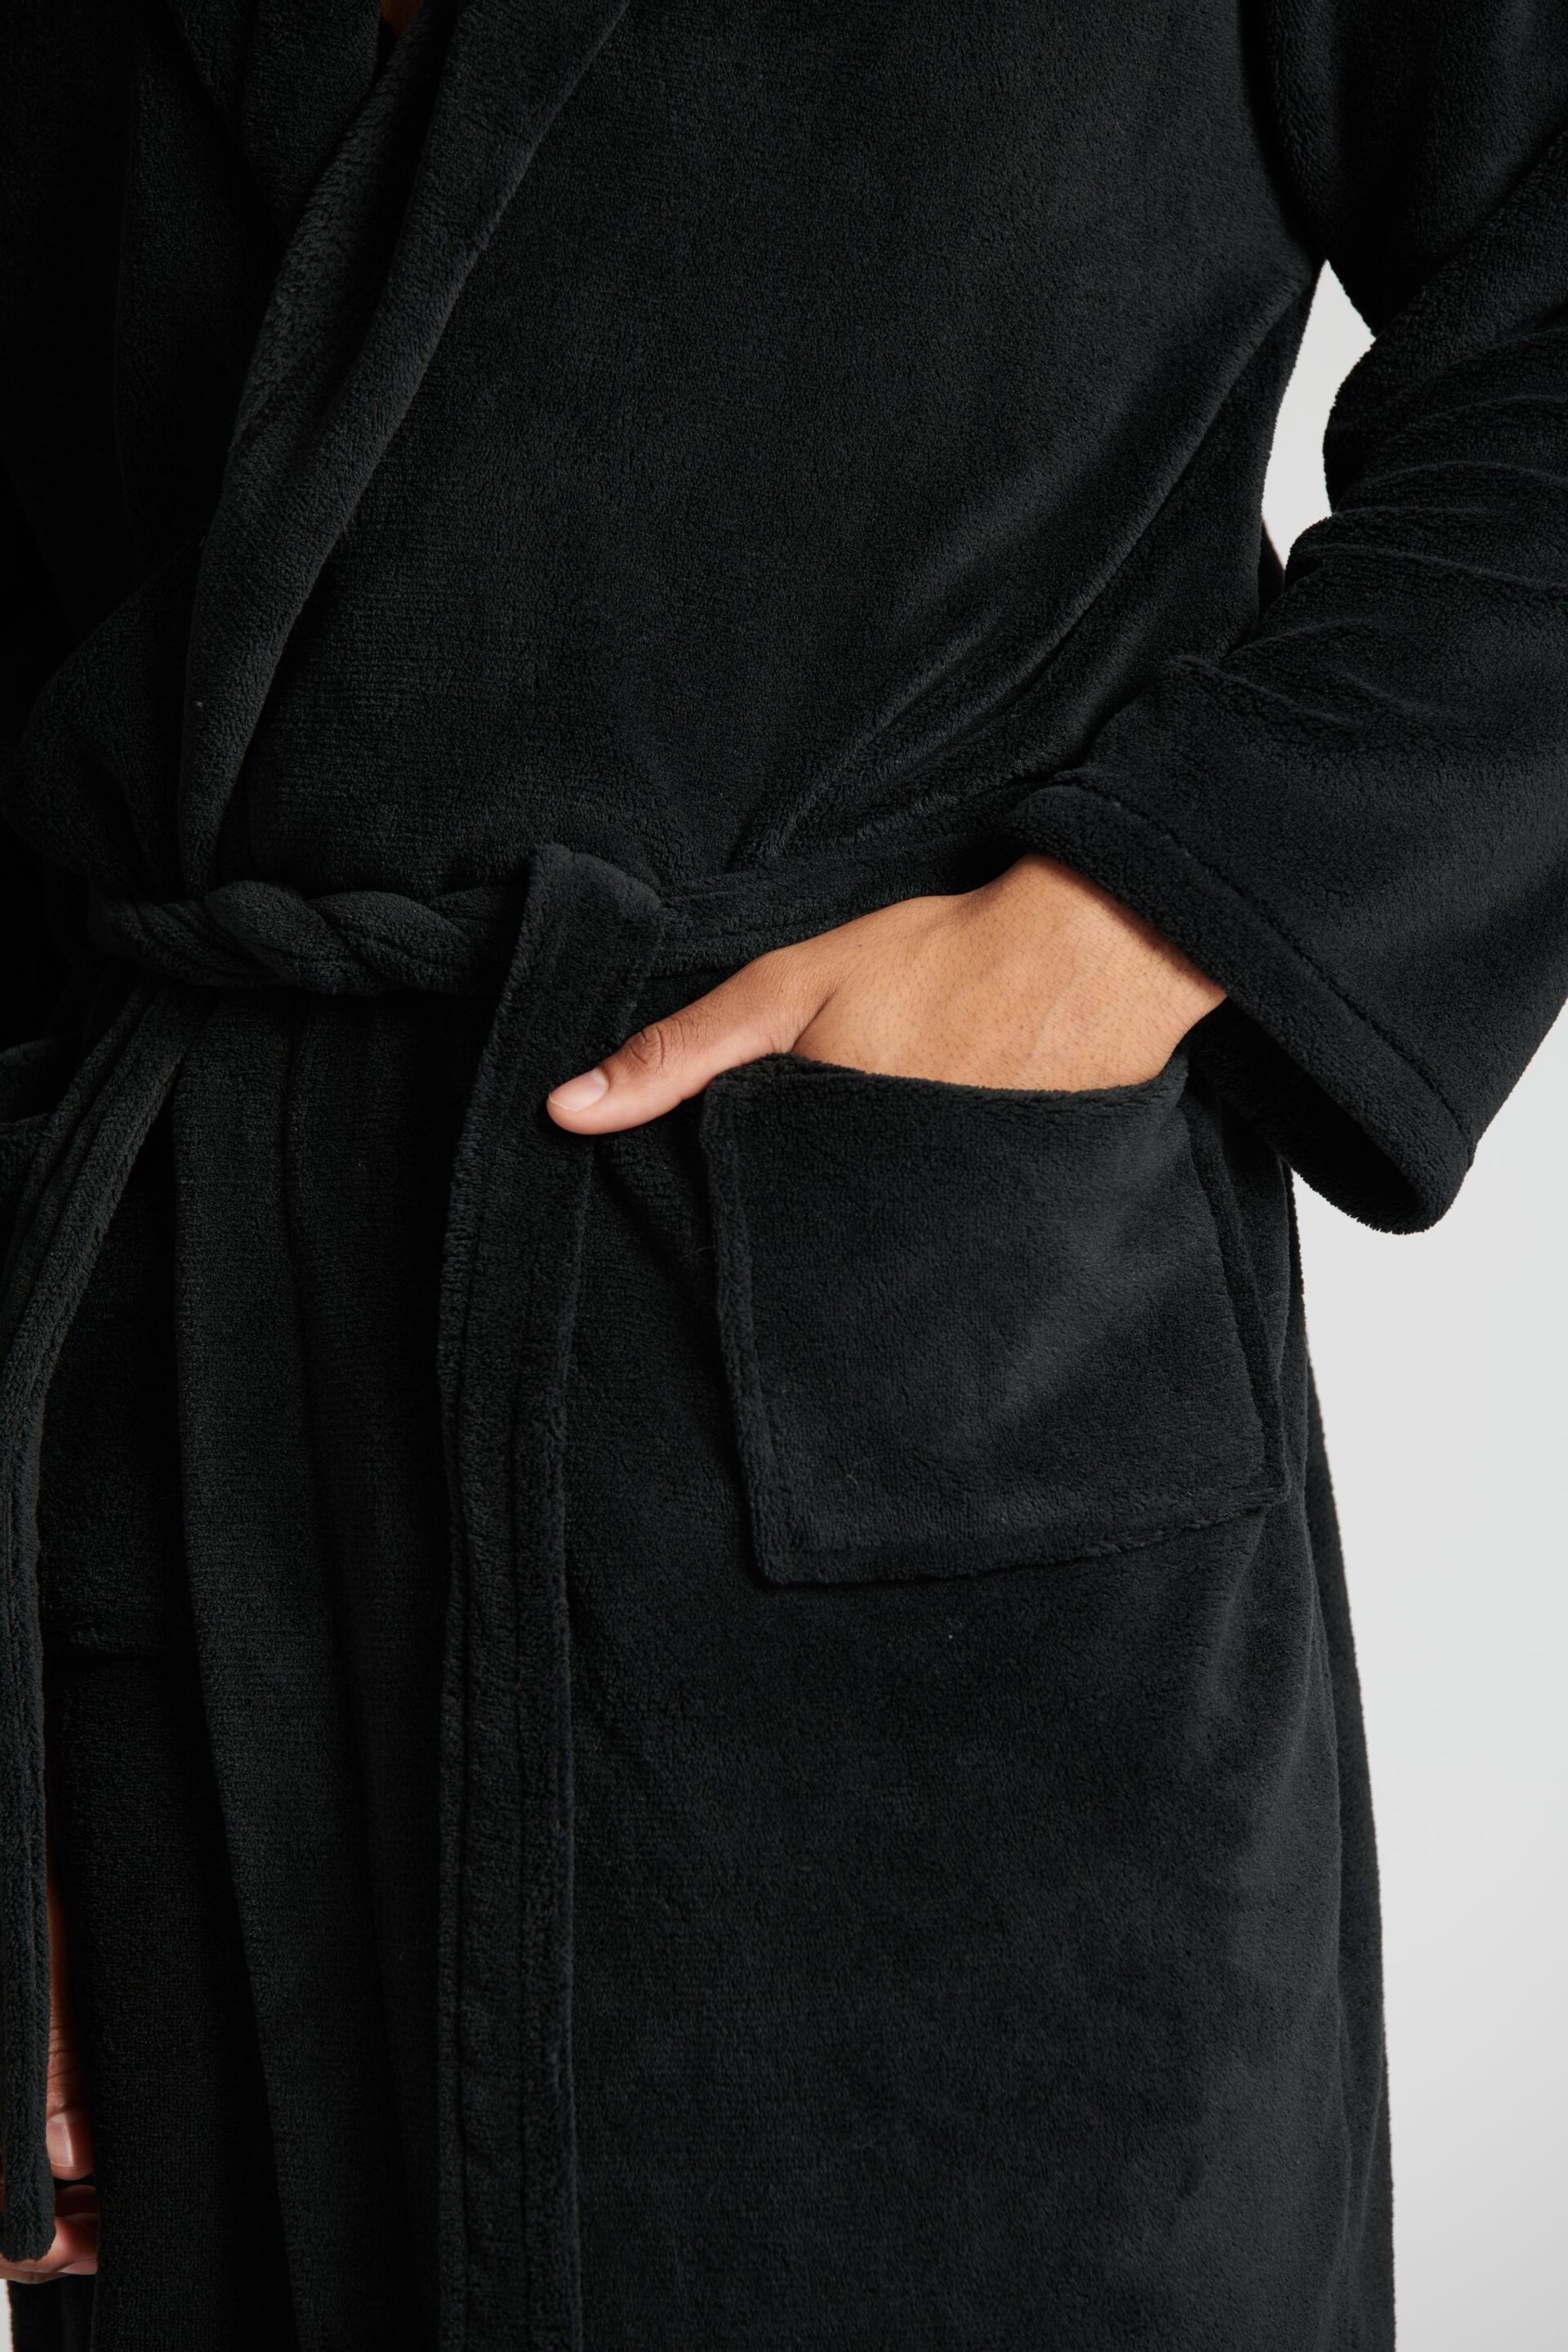 Loungeable Black SuperSoft Fleece Dressing Gown - Image 3 of 5